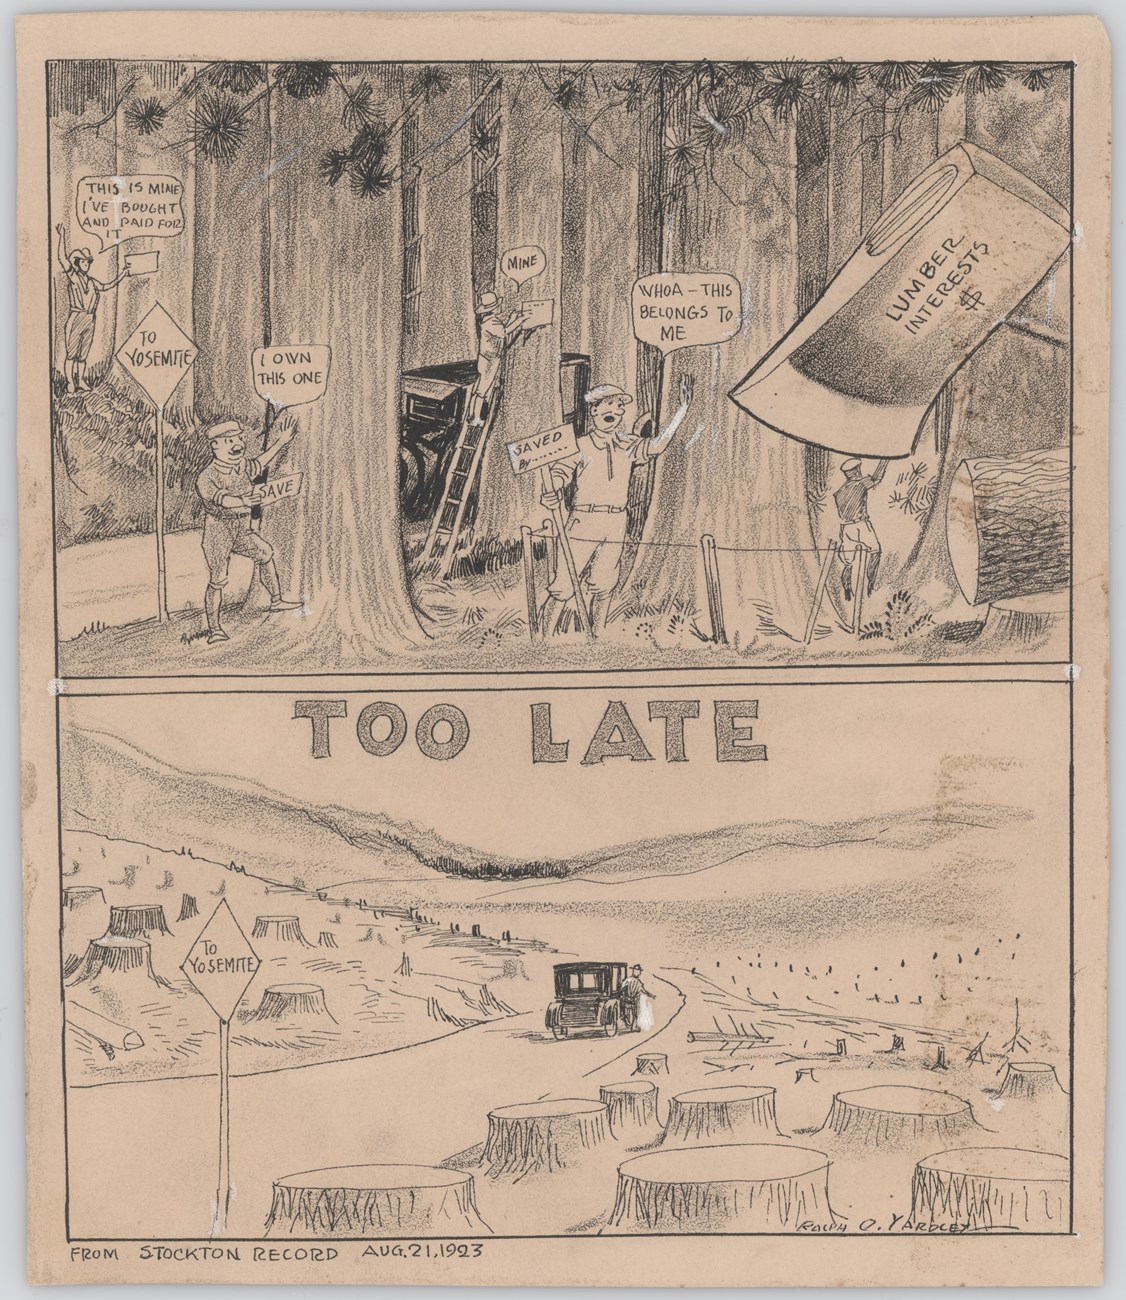 Cartoon with top pane full of trees and people trying to protect them. In the bottom pane all the trees have been cut.